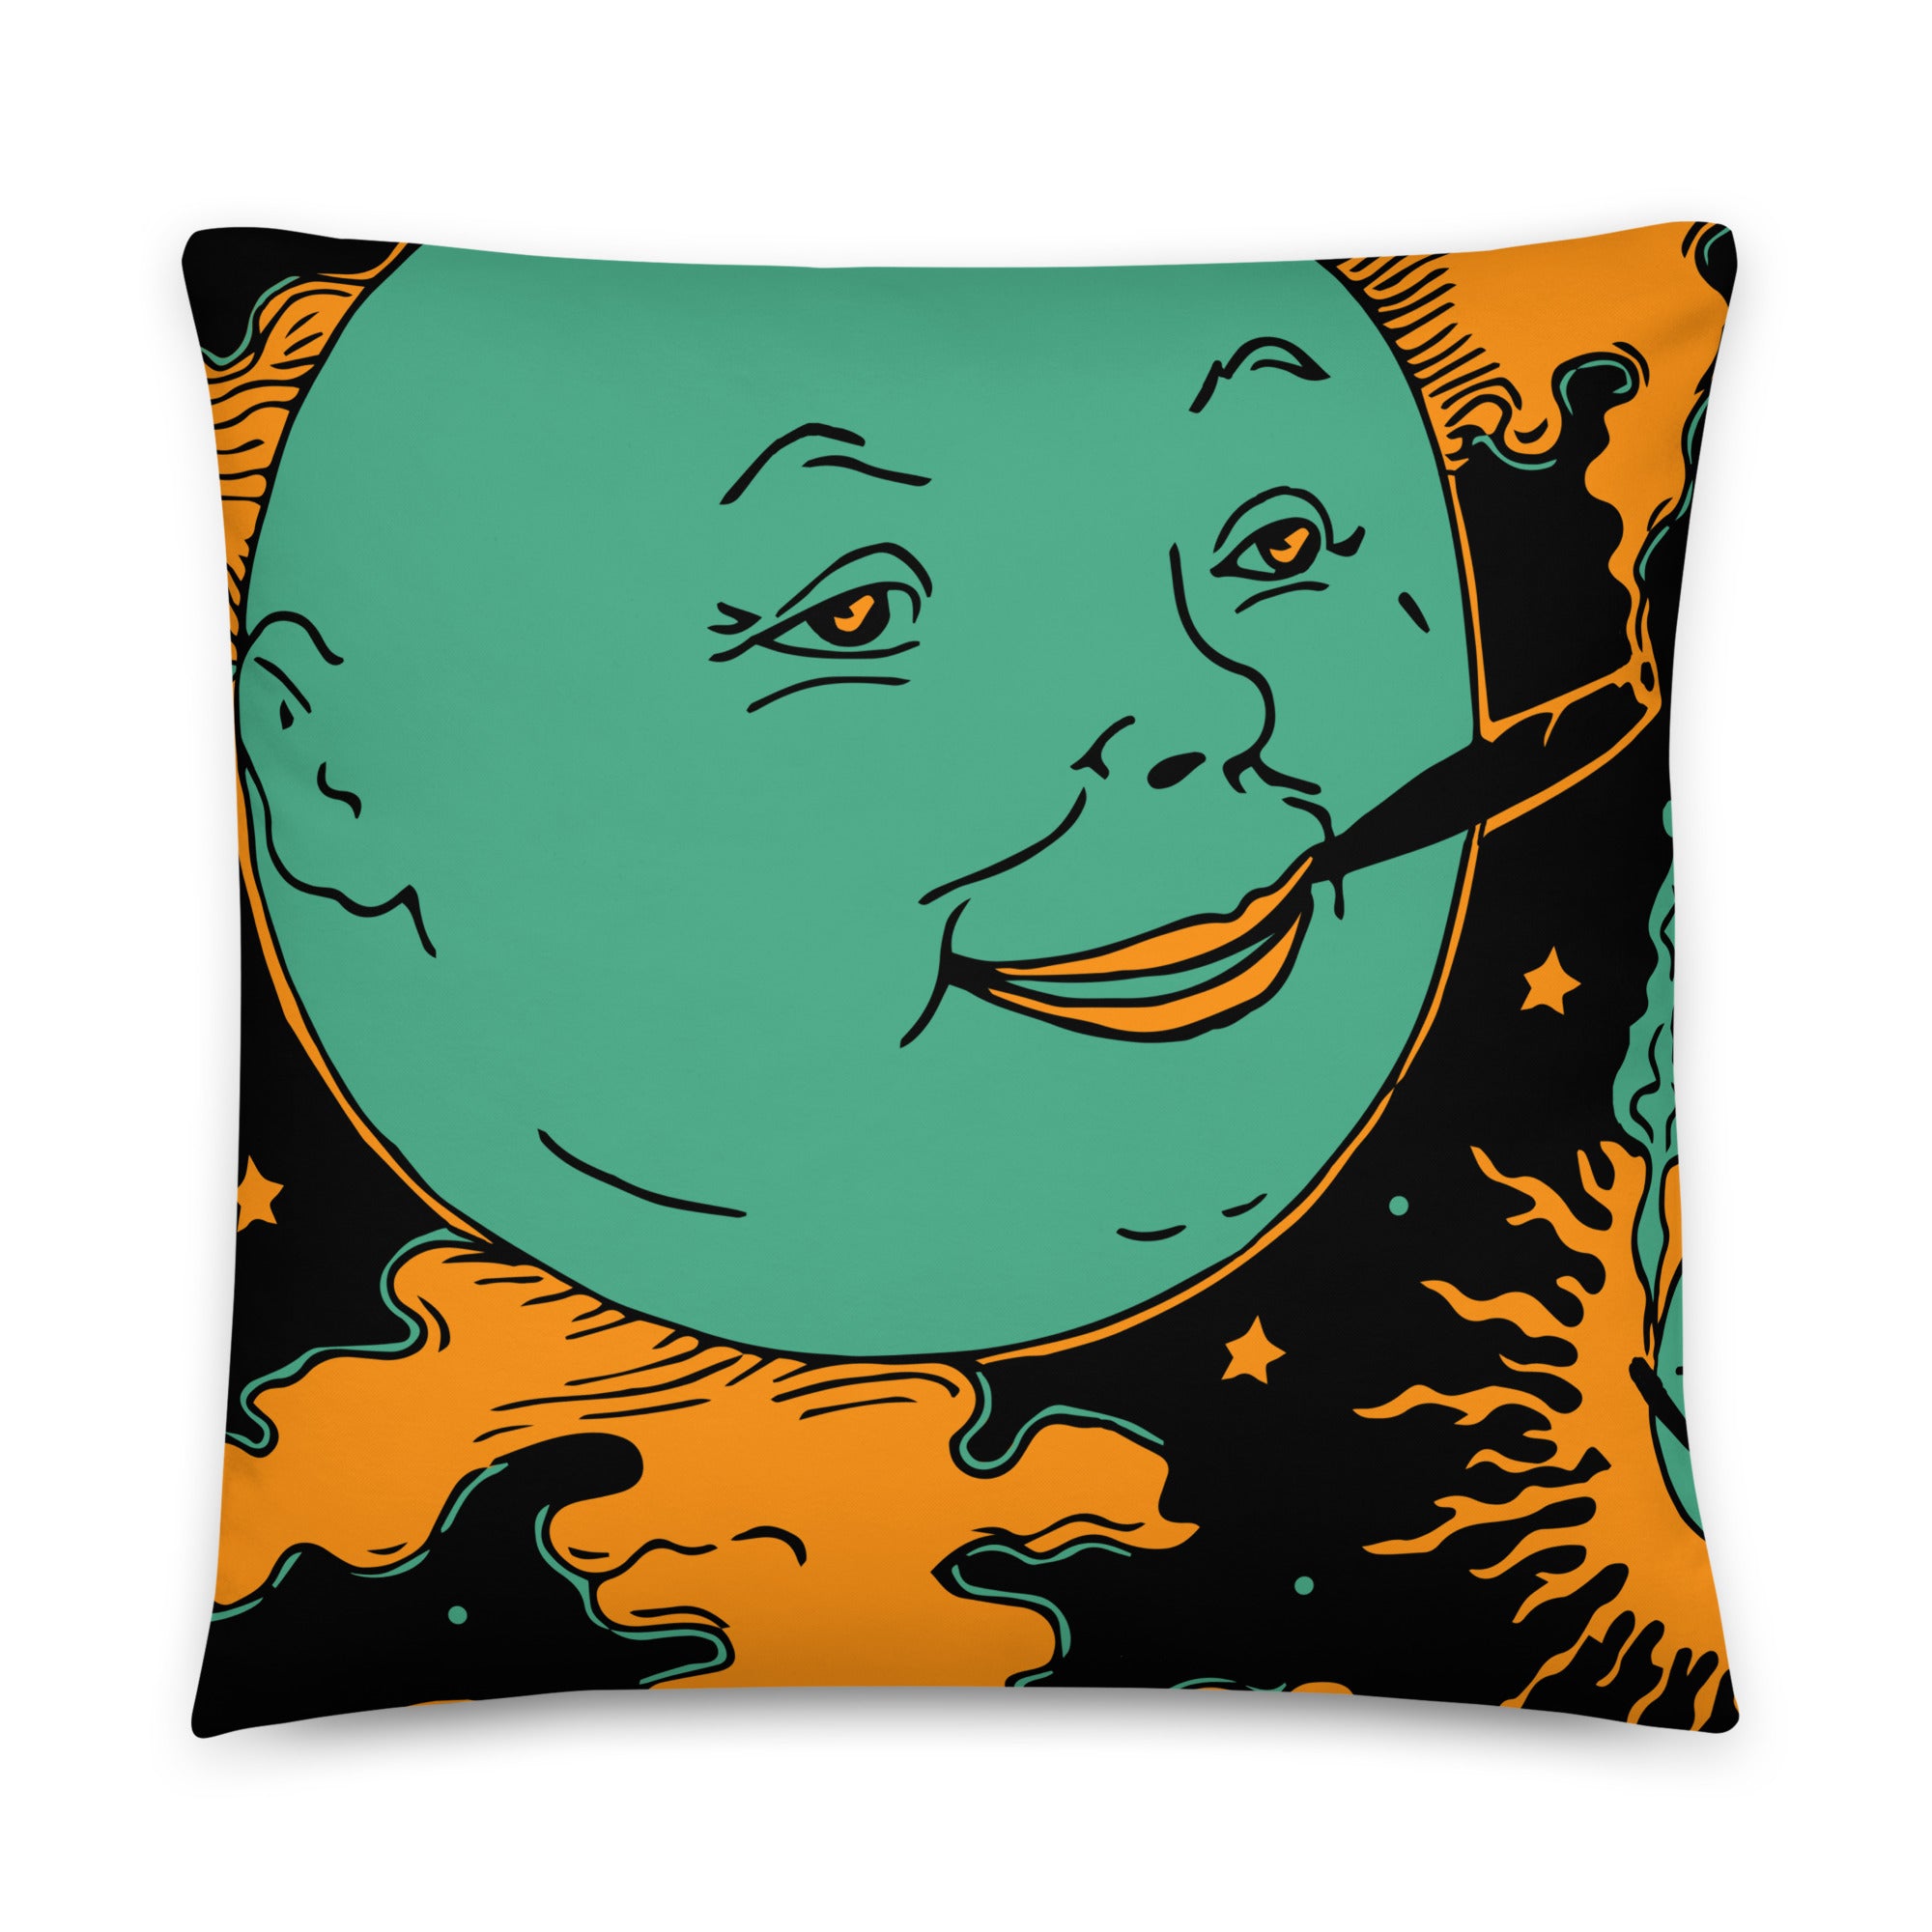 Man on the Moon Large Pillow